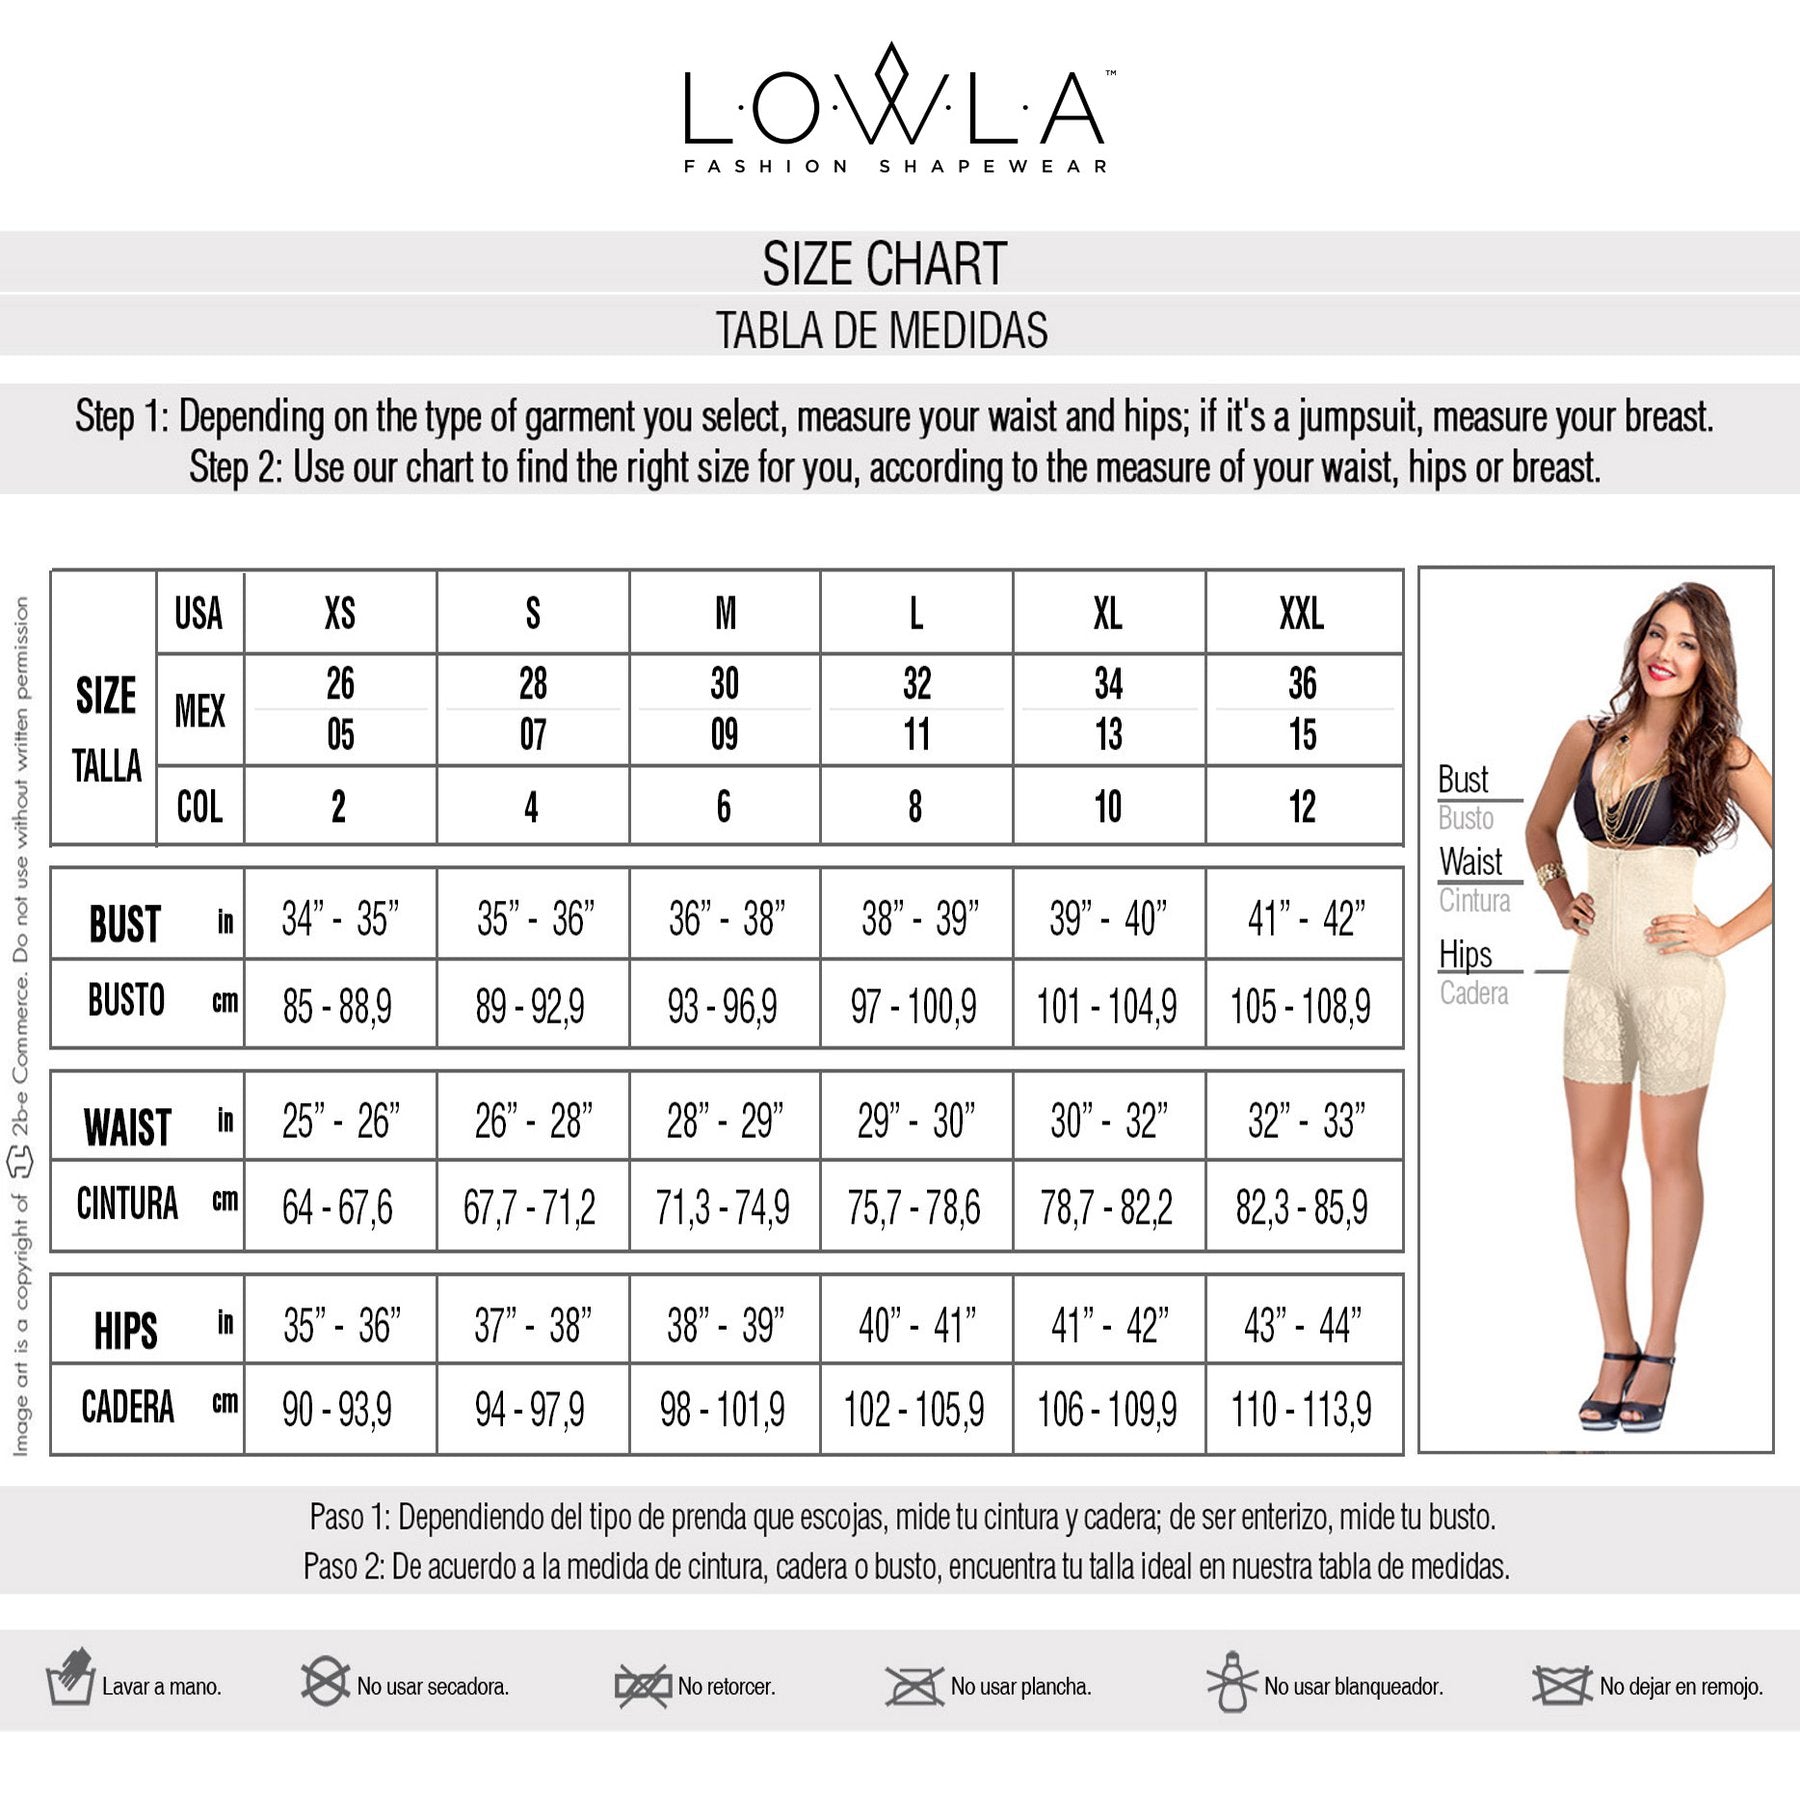 Lowla: 1202 - Slimming One-piece Swimsuit with See-through Details - Showmee Store